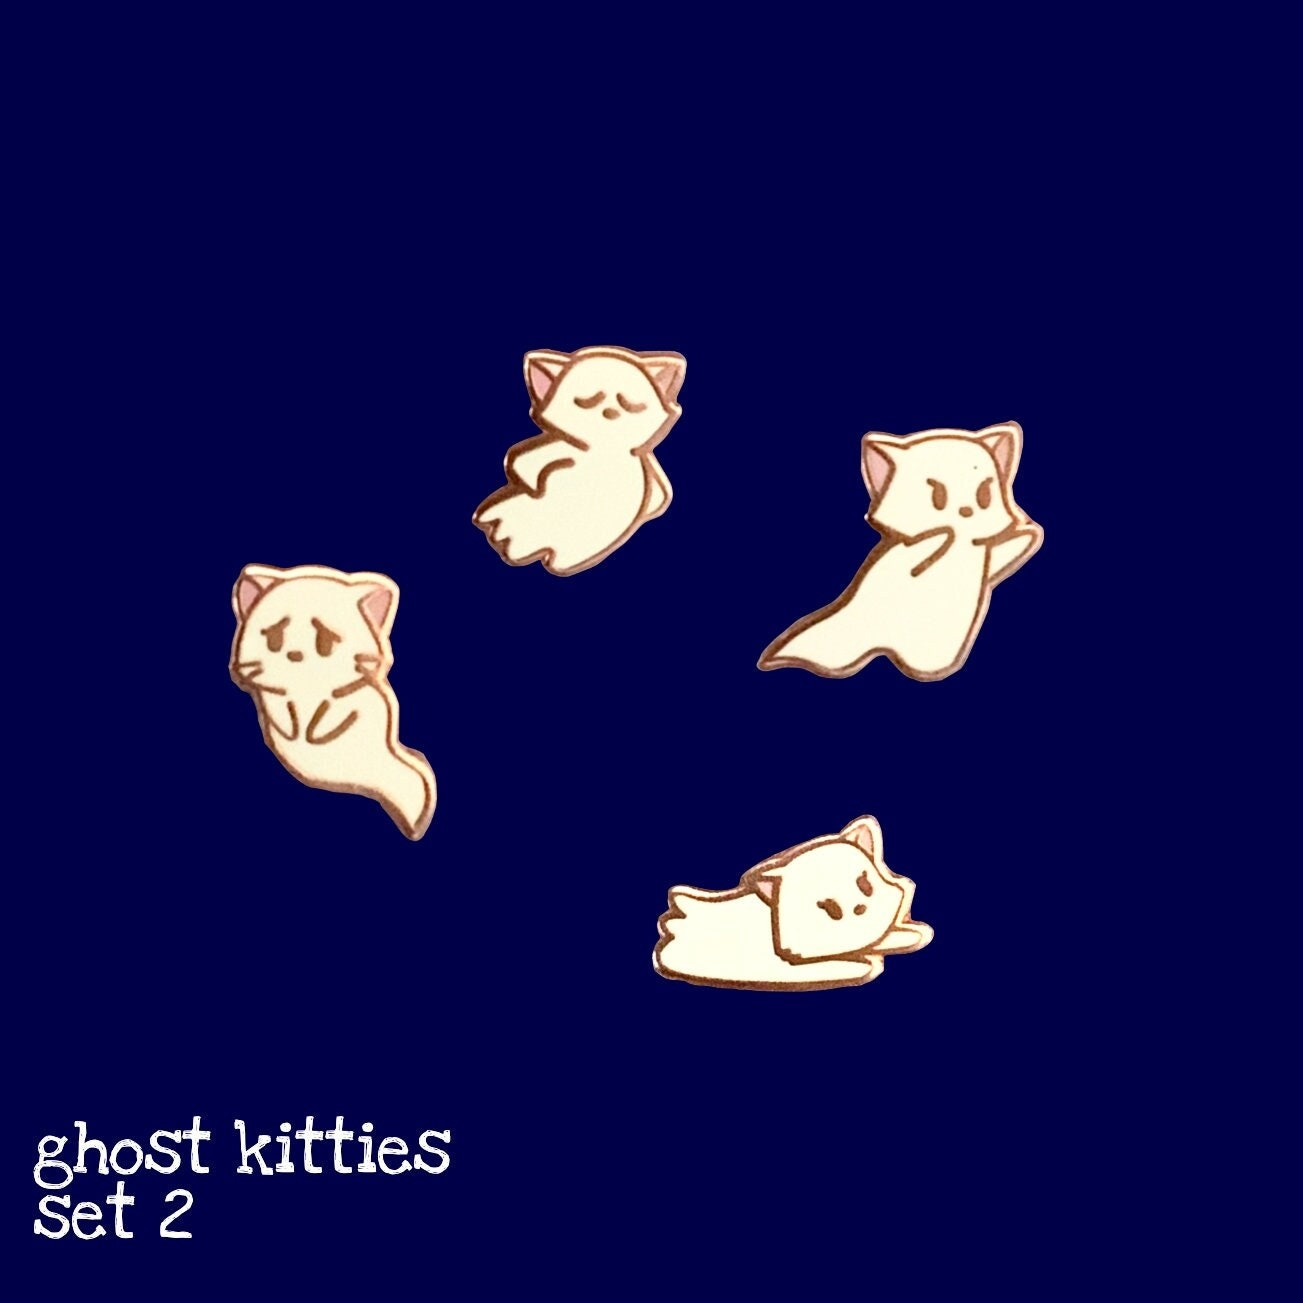 Ghost Kitty, Zoomies - Tiny Enamel Pin, Halloween Cat Pin, Pins, Brooches & Lapel Pins